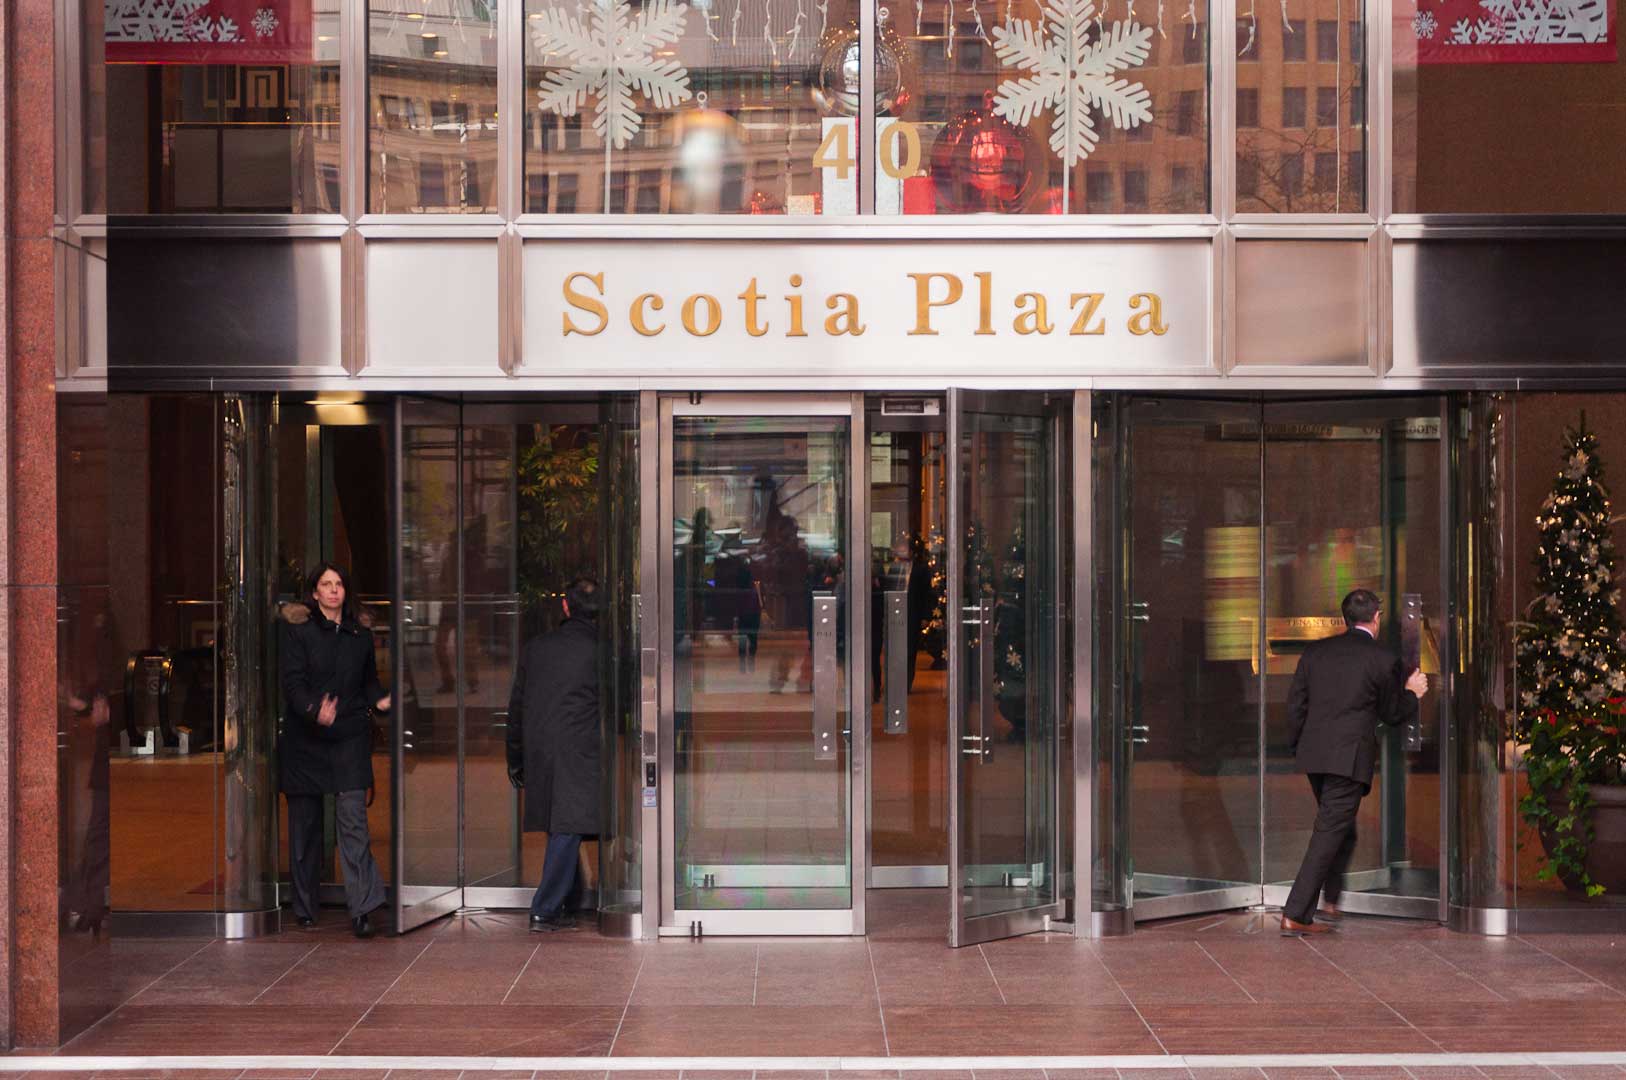 People going through the Revolving Doors at the Scotia Plaza in Toronto maintained by Explore1